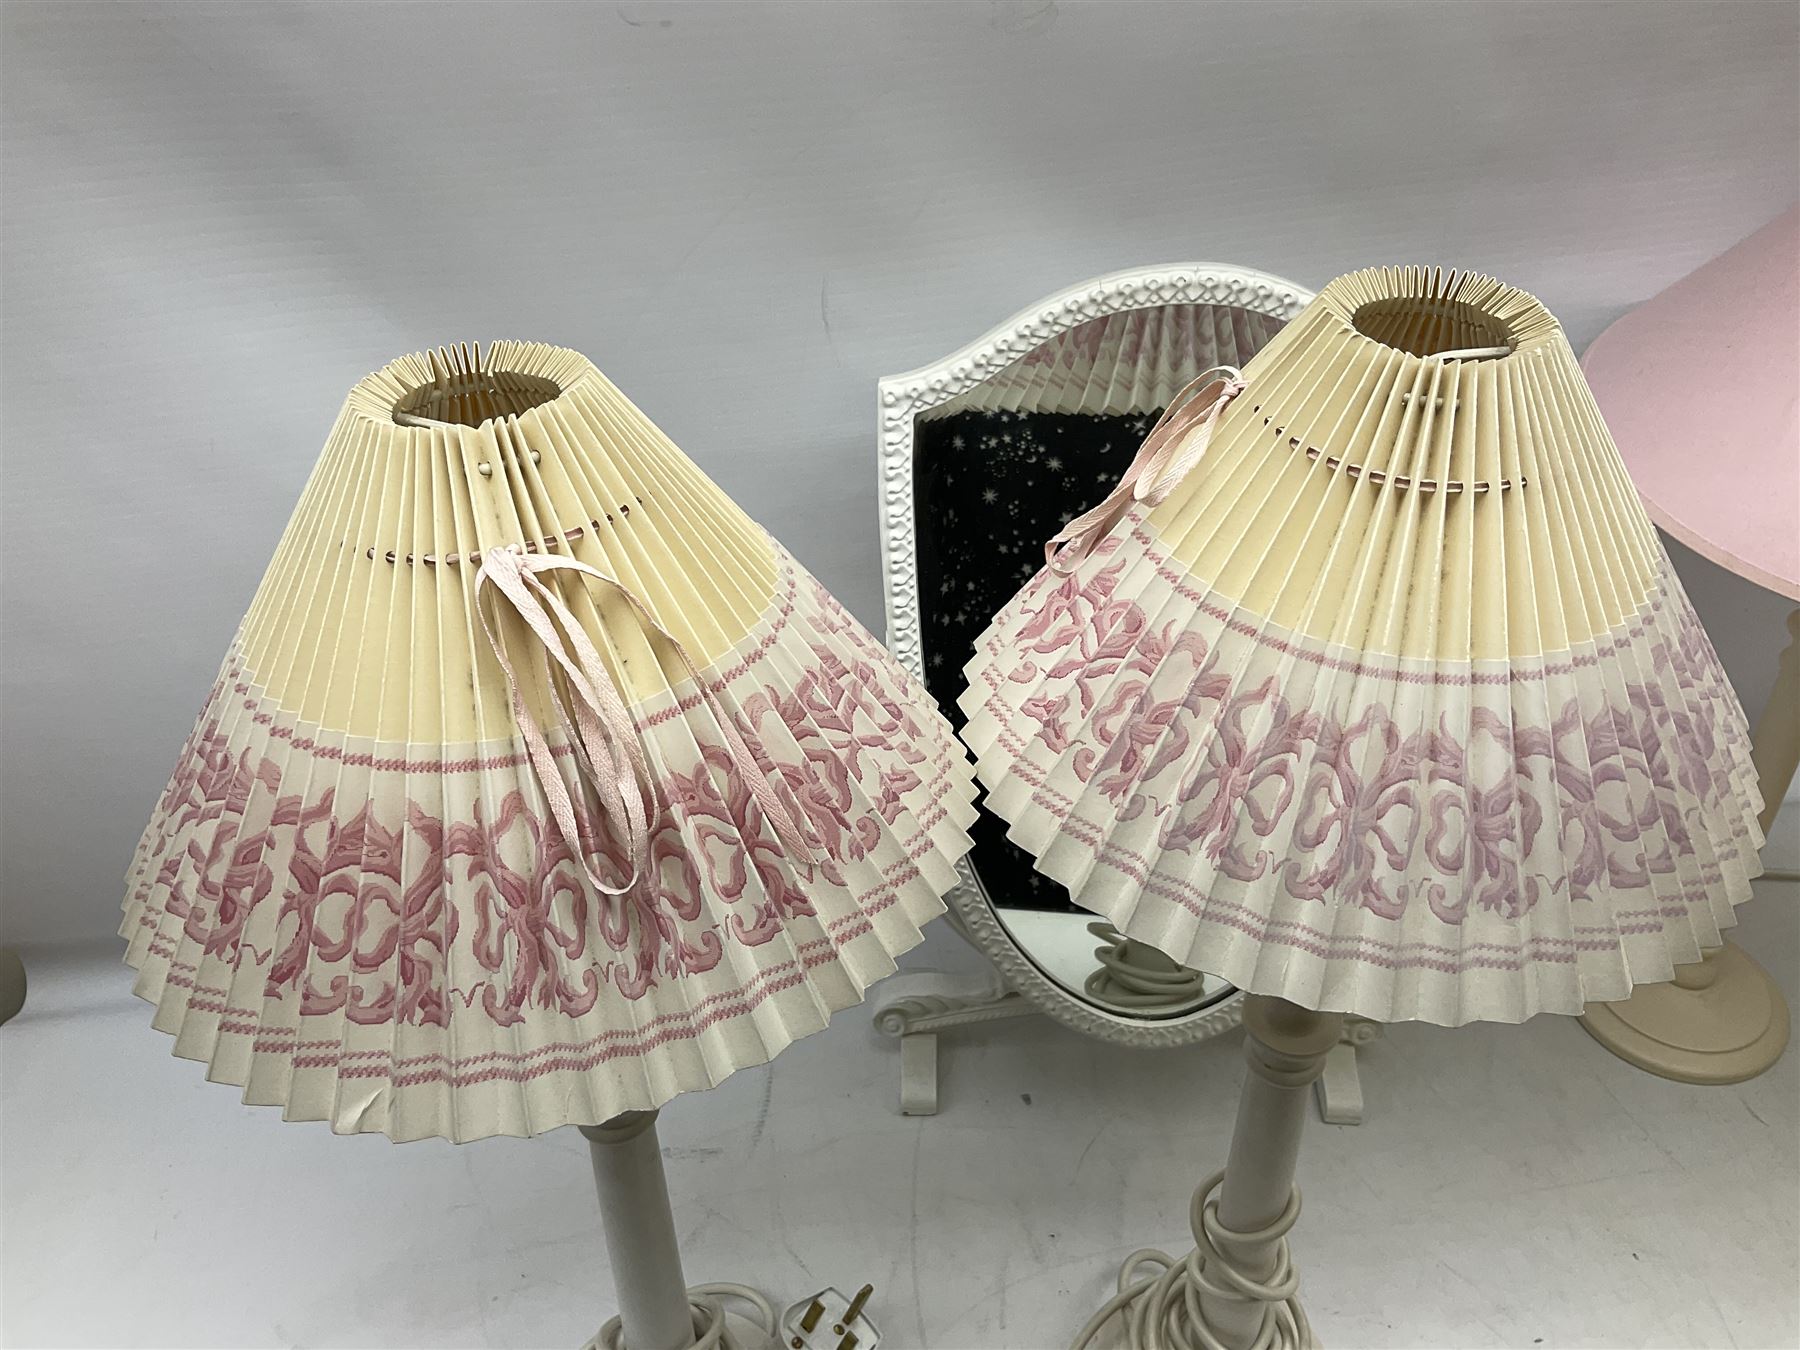 Four white / cream table lamps with pink shades and an ornate mirror of shield form - Image 9 of 9